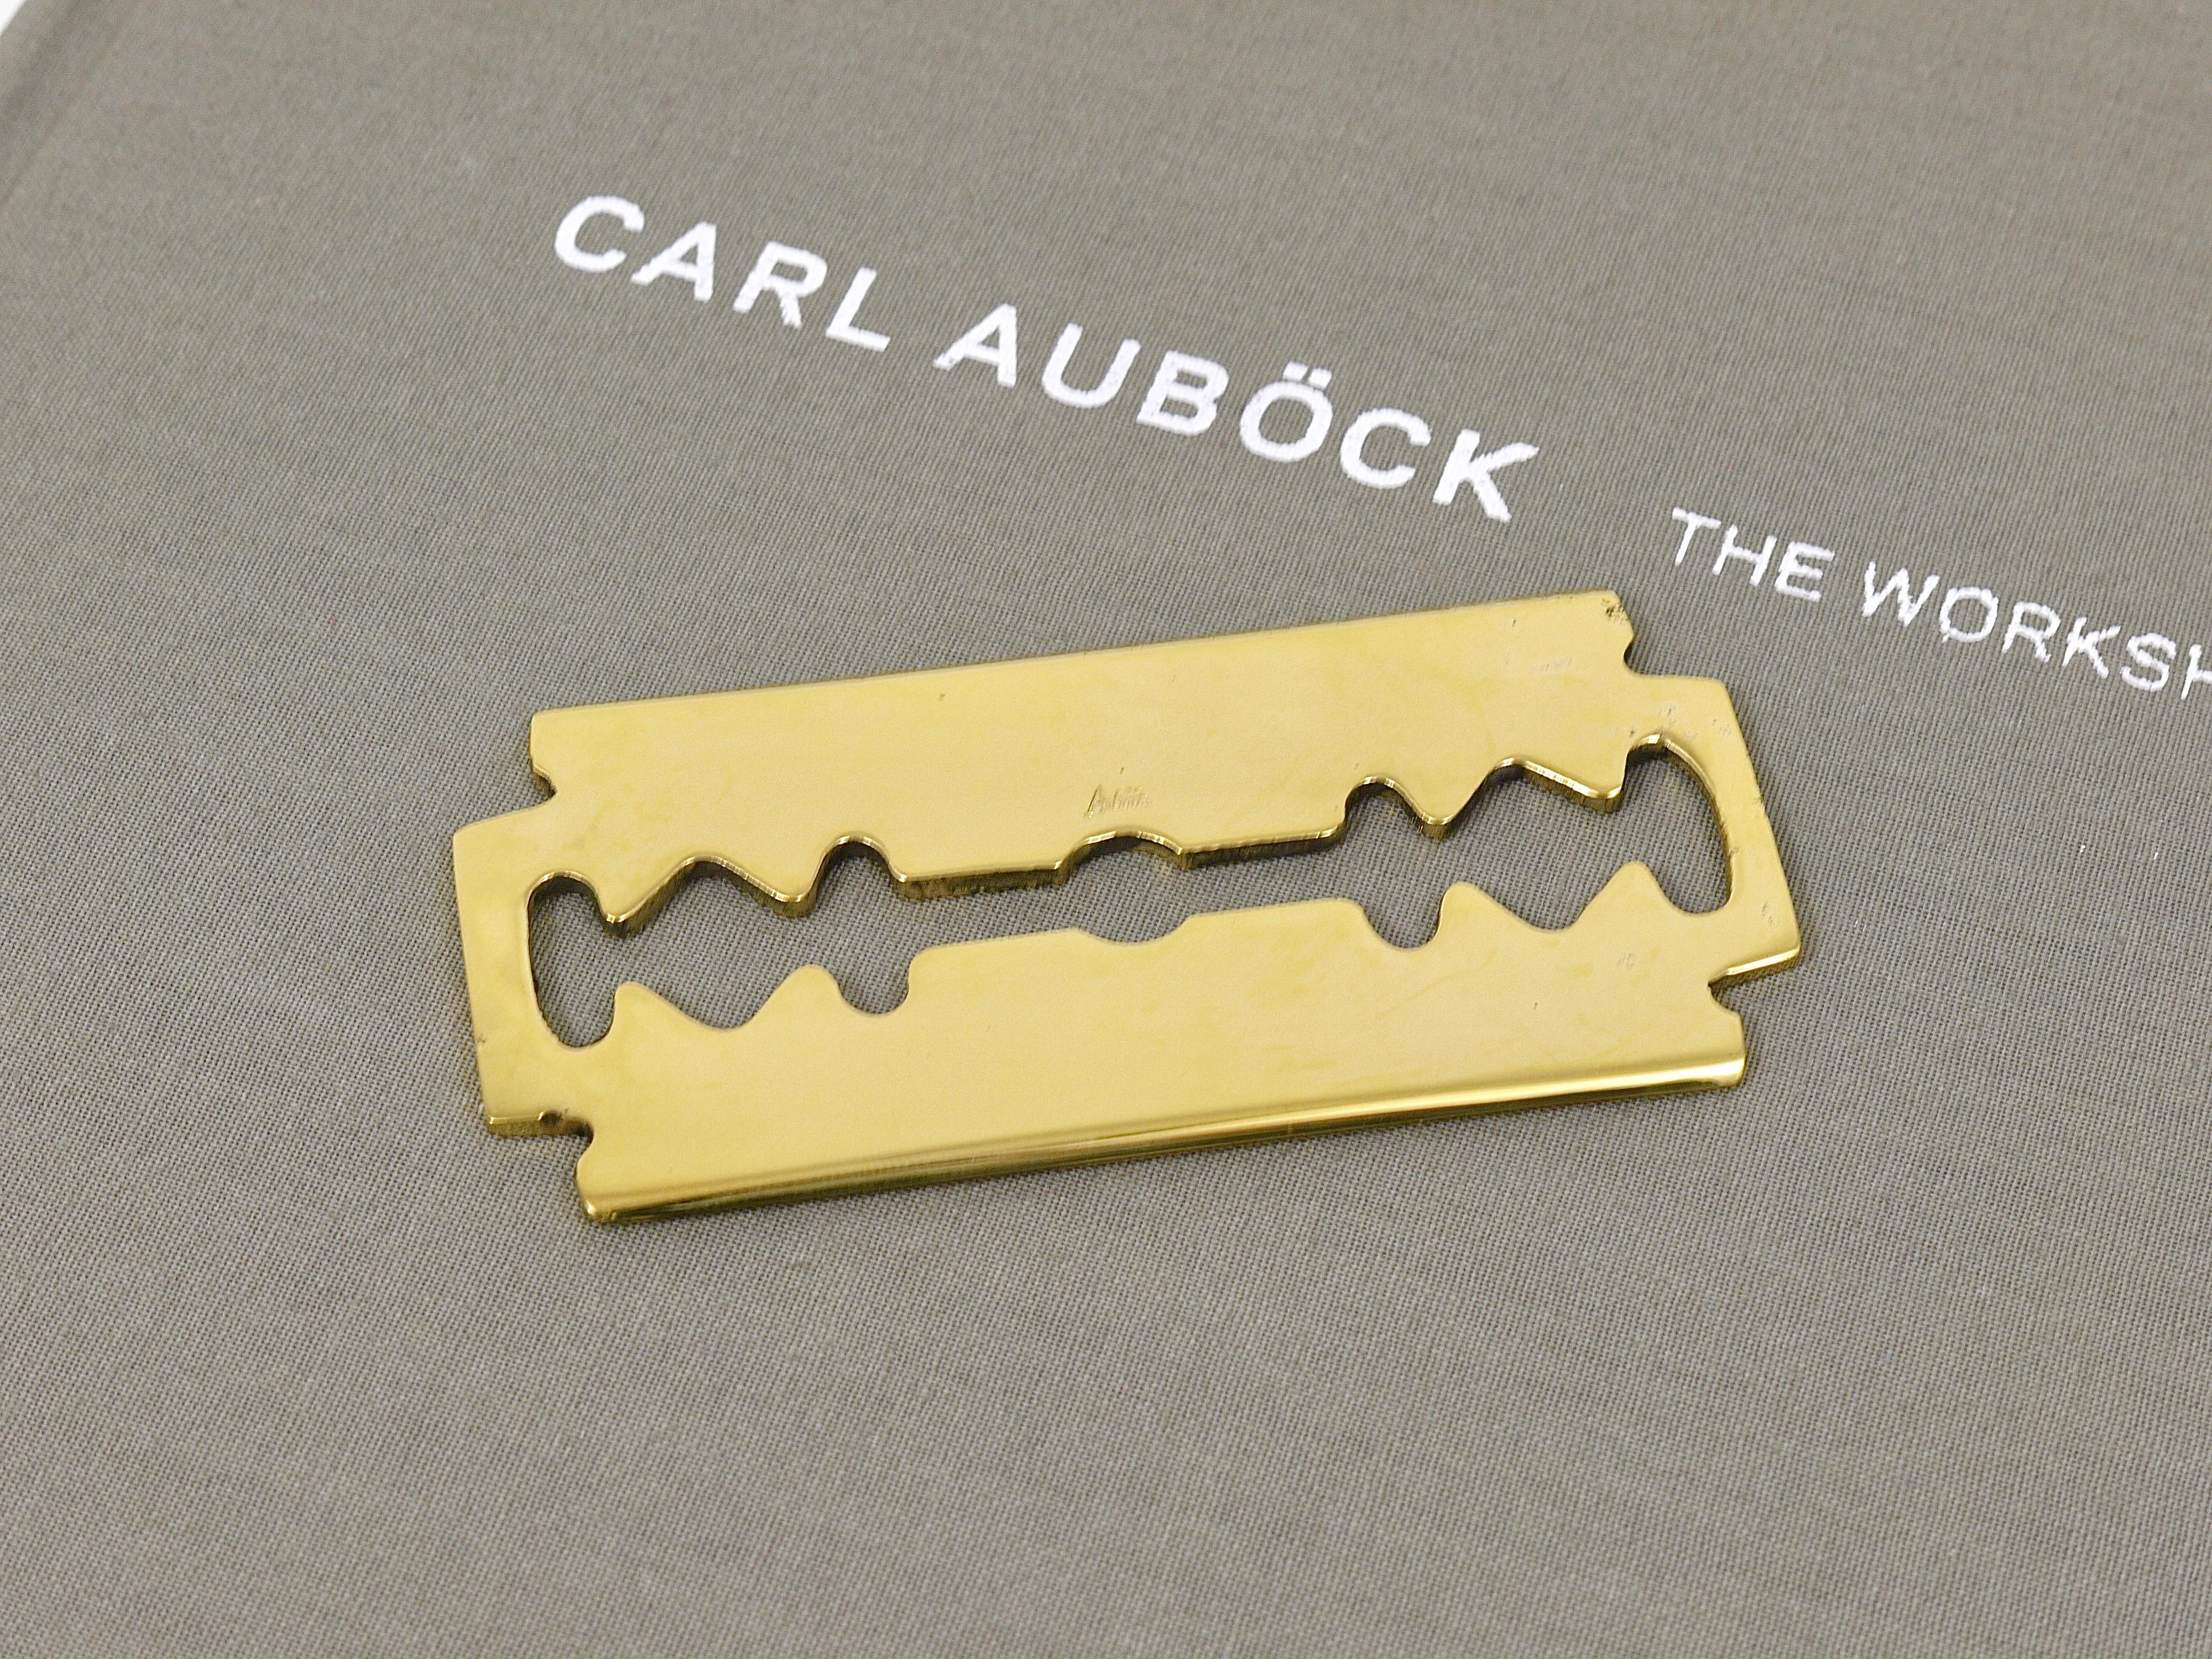 A handmade paperweight in the shape of a razorblade, model 5378, originally designed by Carl Aubock in the 1950s. A very charming piece, reissued by Werkstätte Auböck in Vienna / Austria. Handmade of polished brass. Marked. A decorative object on